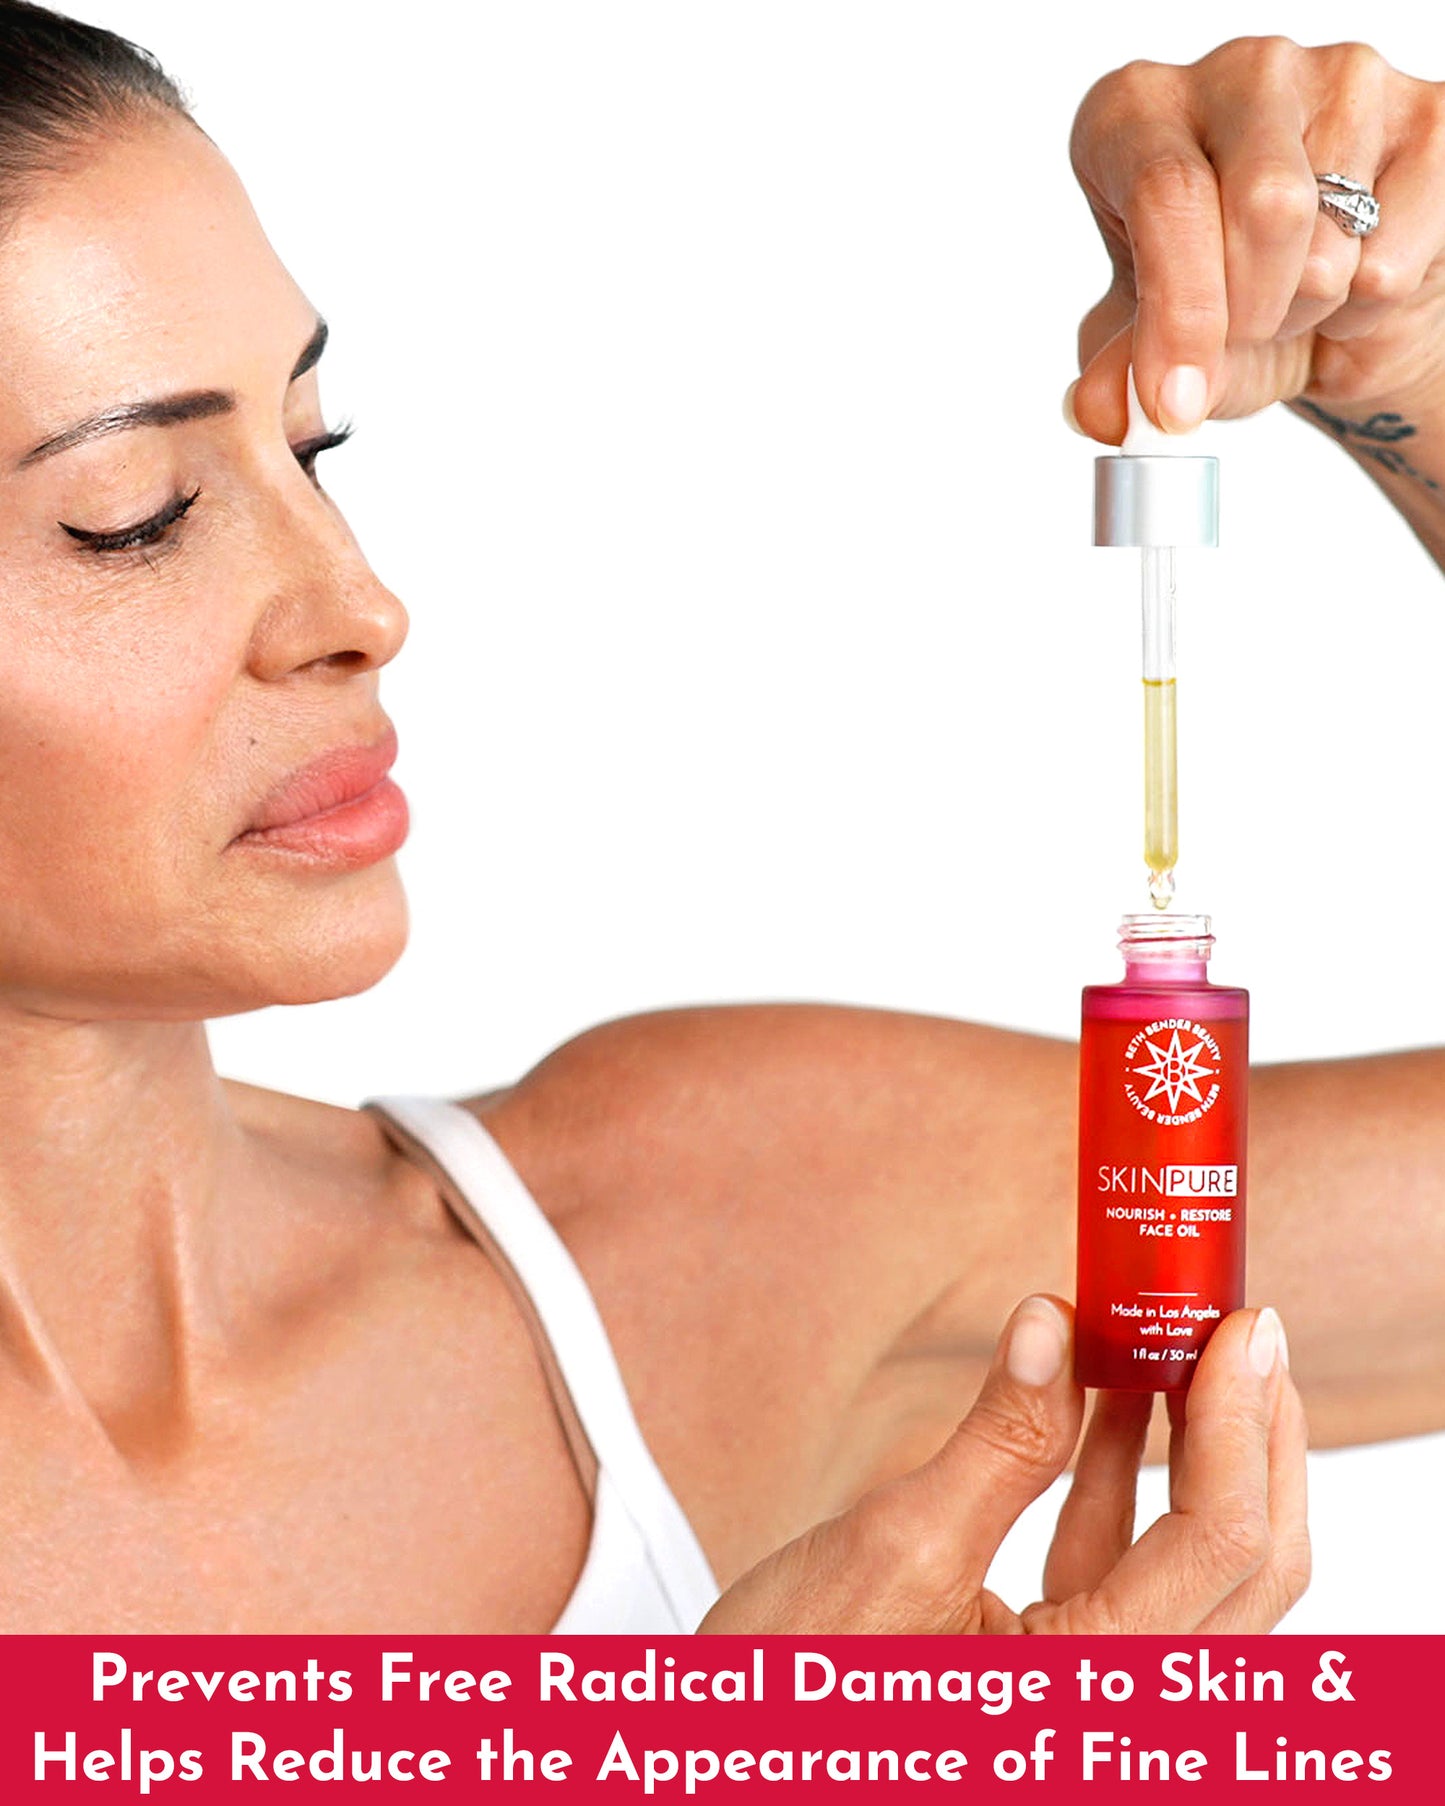 Beth Bender Beauty - SkinPURE Glow To the Power of C Face Oil